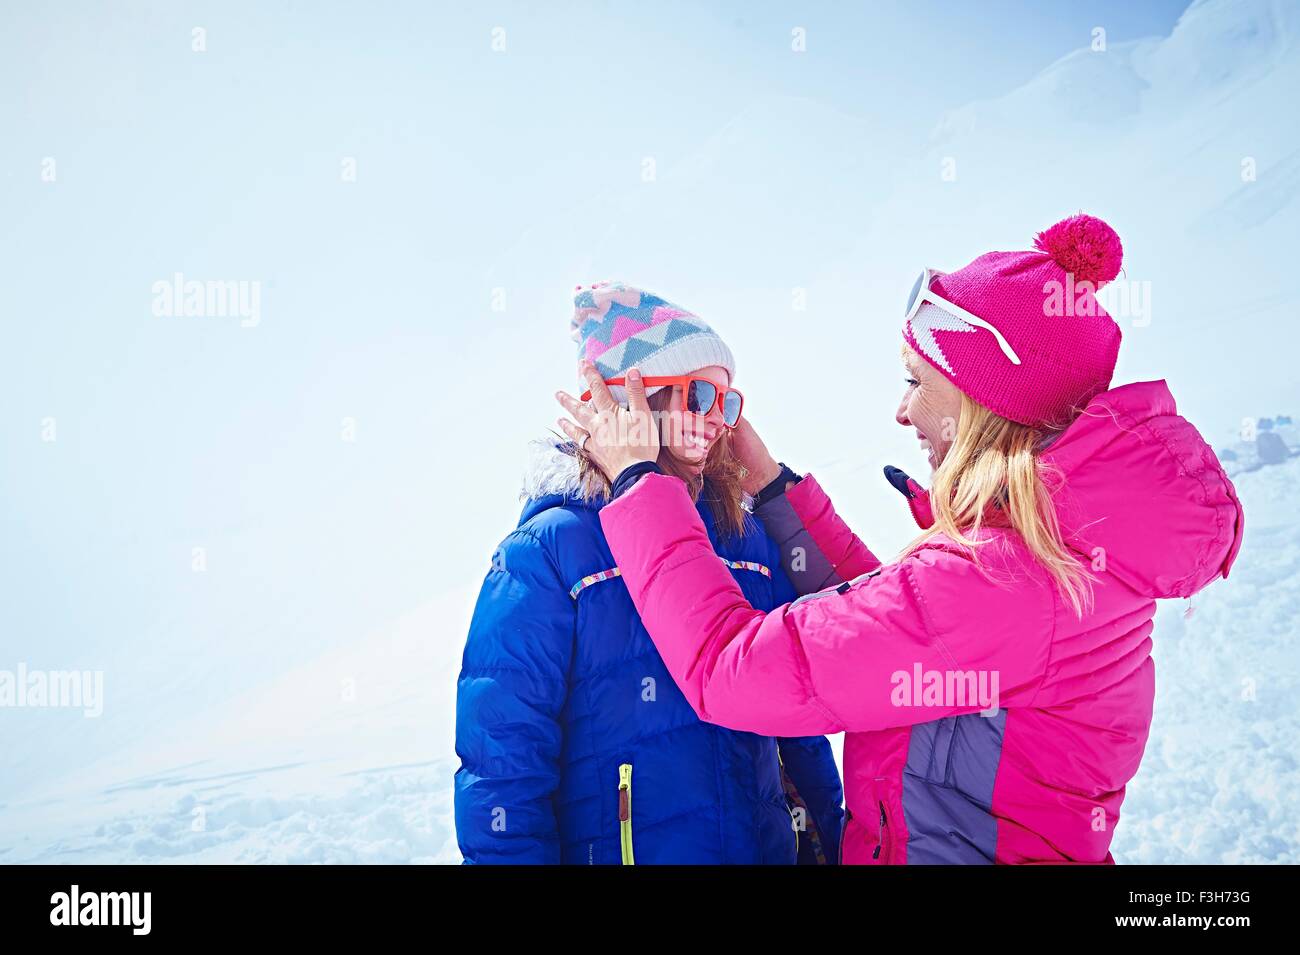 Mother helping daughter with sunglasses, Chamonix, France Banque D'Images